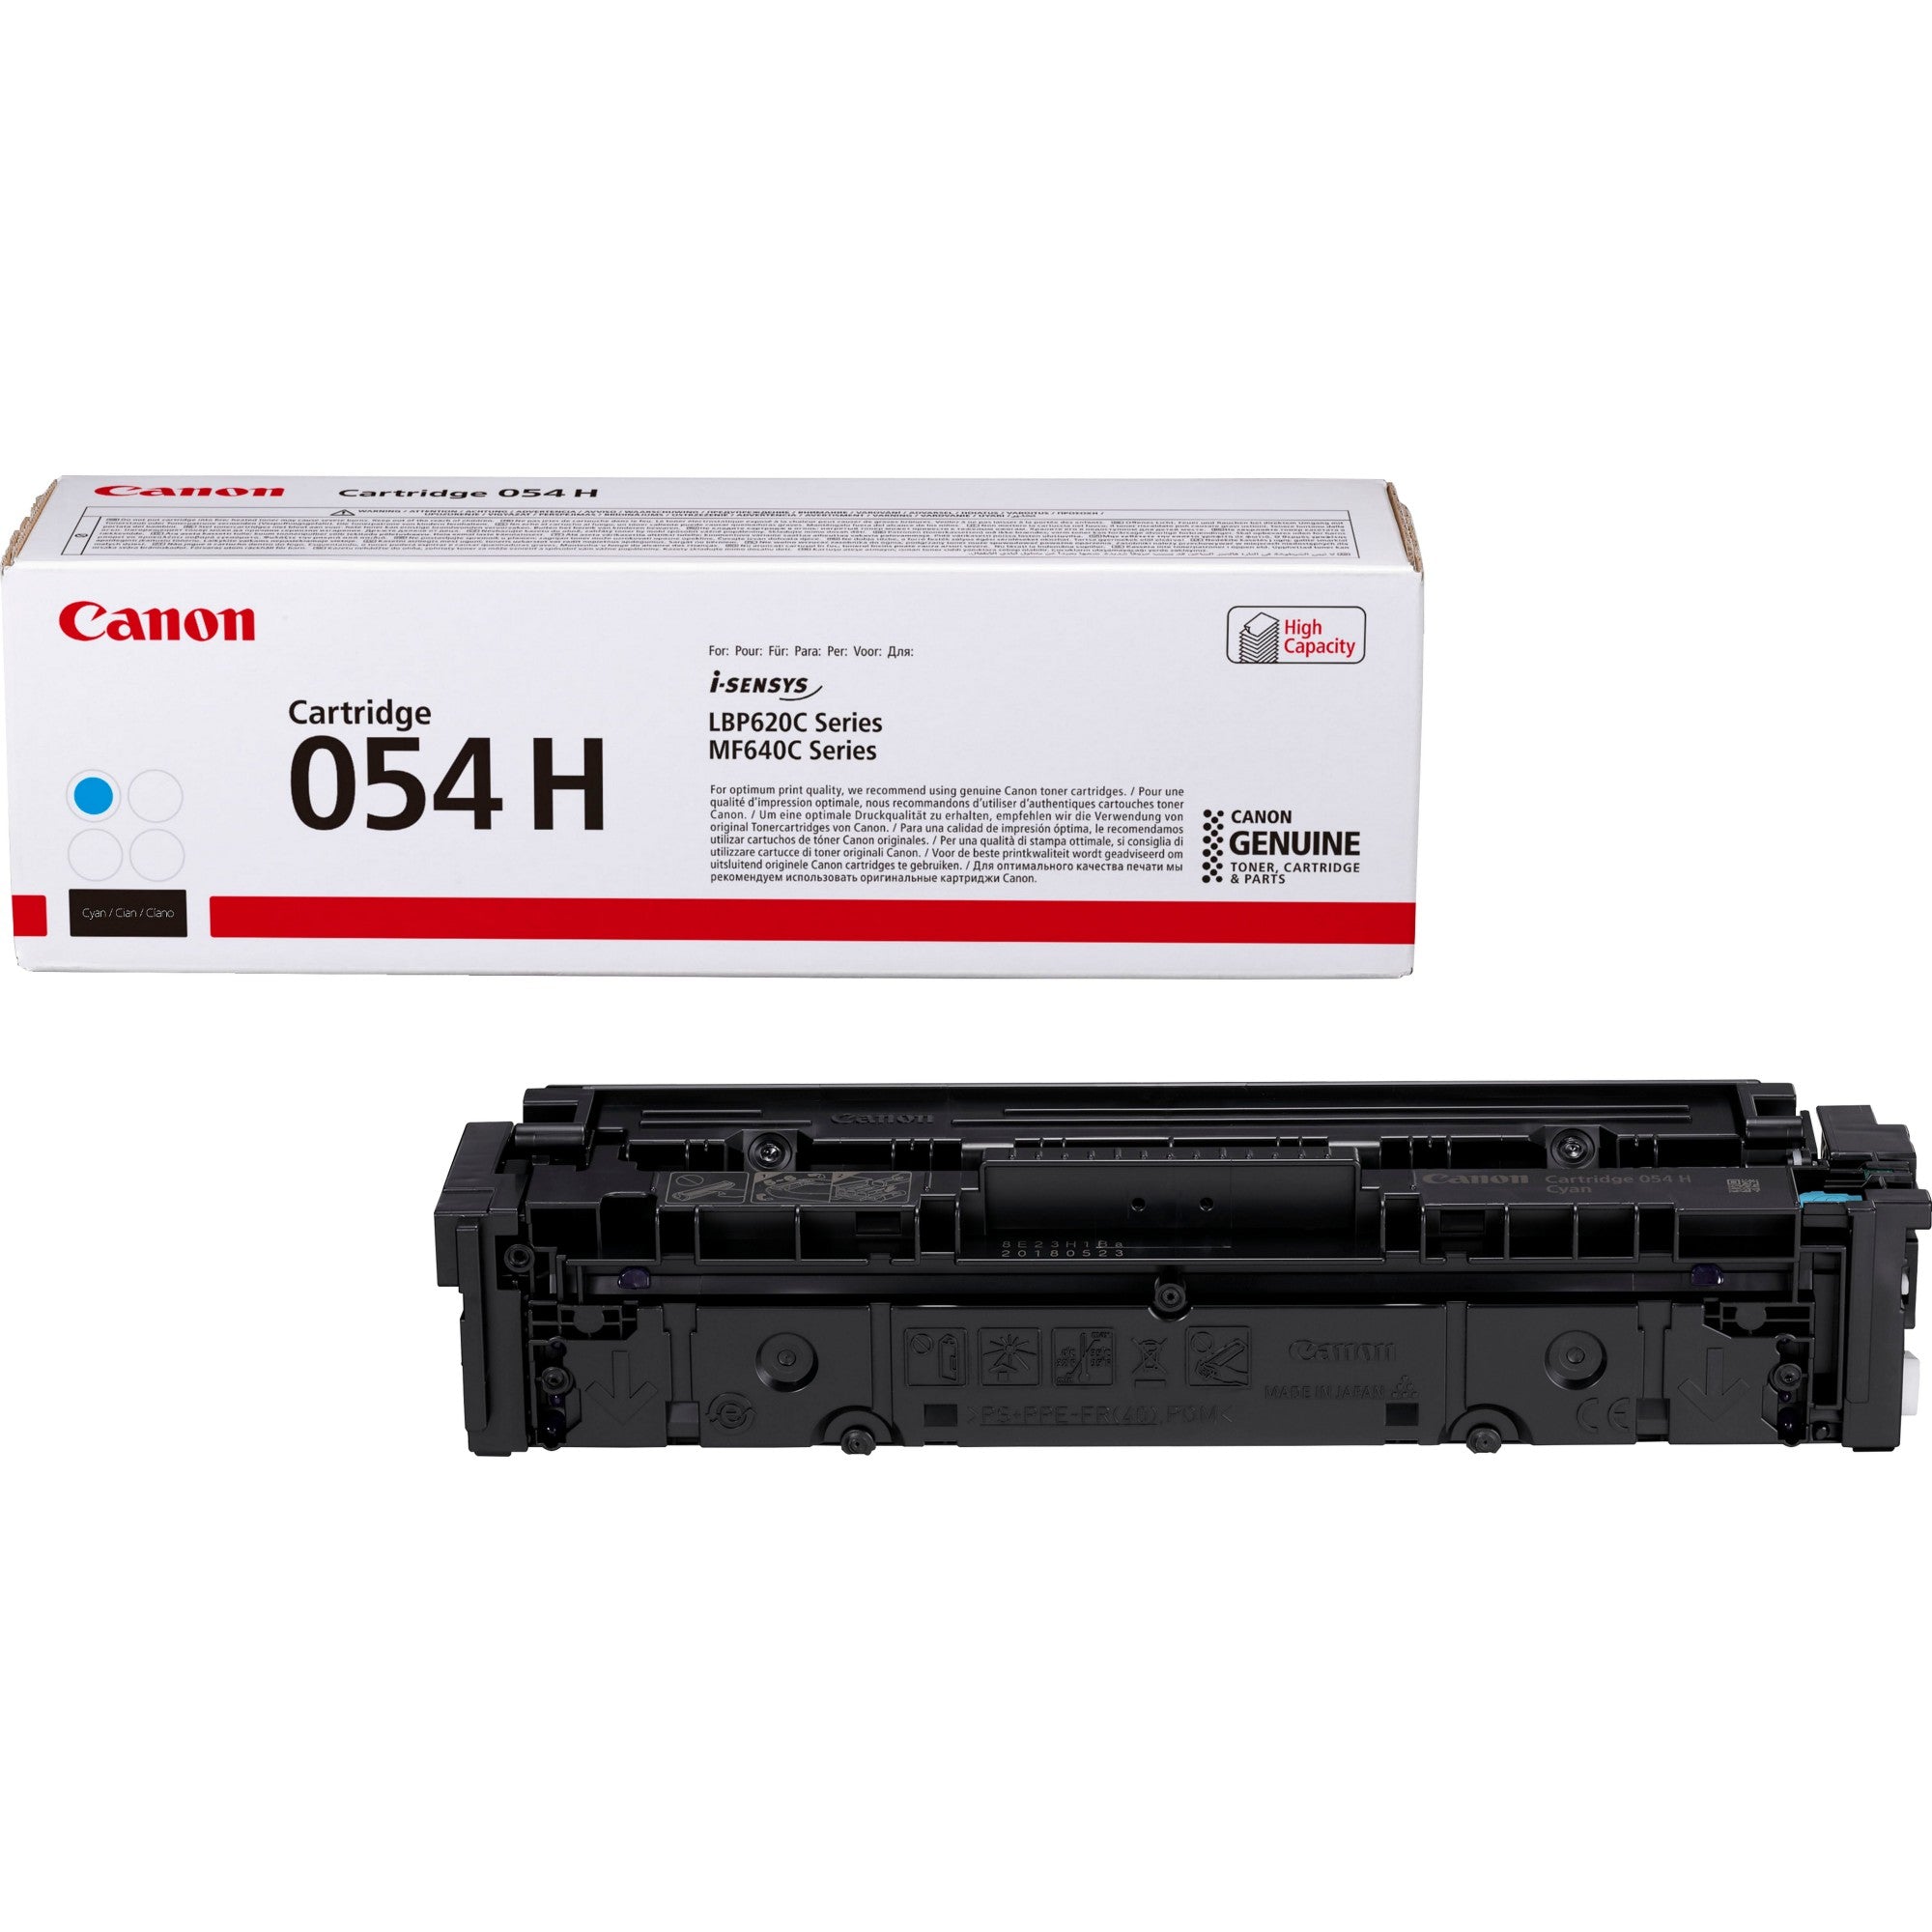 Canon 3027C002/054H Toner cartridge cyan, 2.3K pages ISO/IEC 19752 for Canon LBP-640